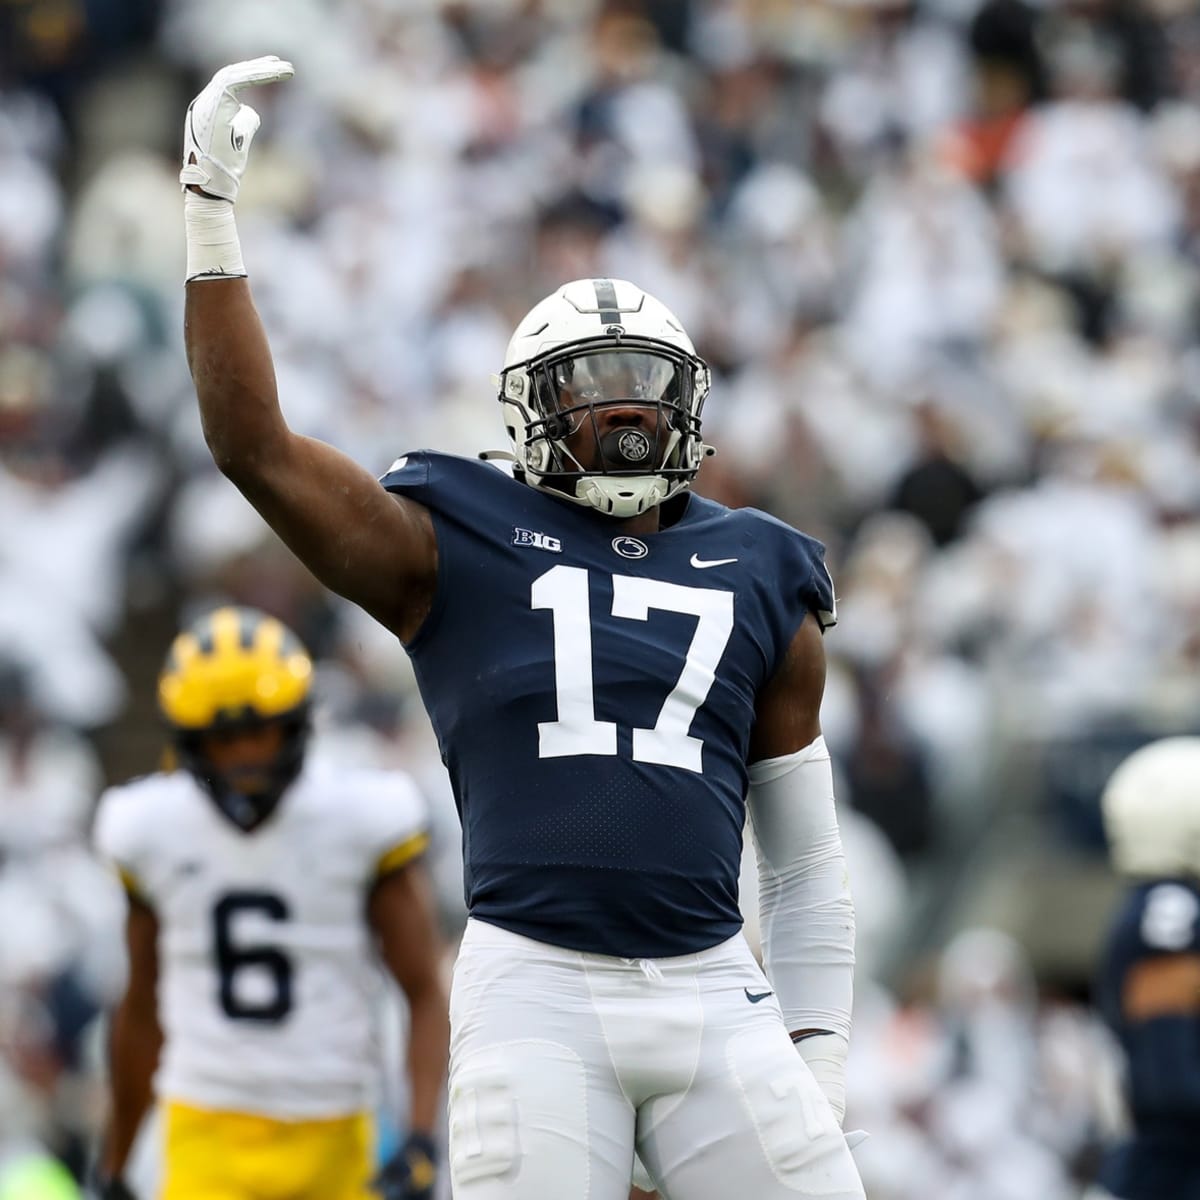 Penn State edge defender Arnold Ebiketie is rising up NFL Draft boards  thanks to his smarts, production and explosion, NFL Draft